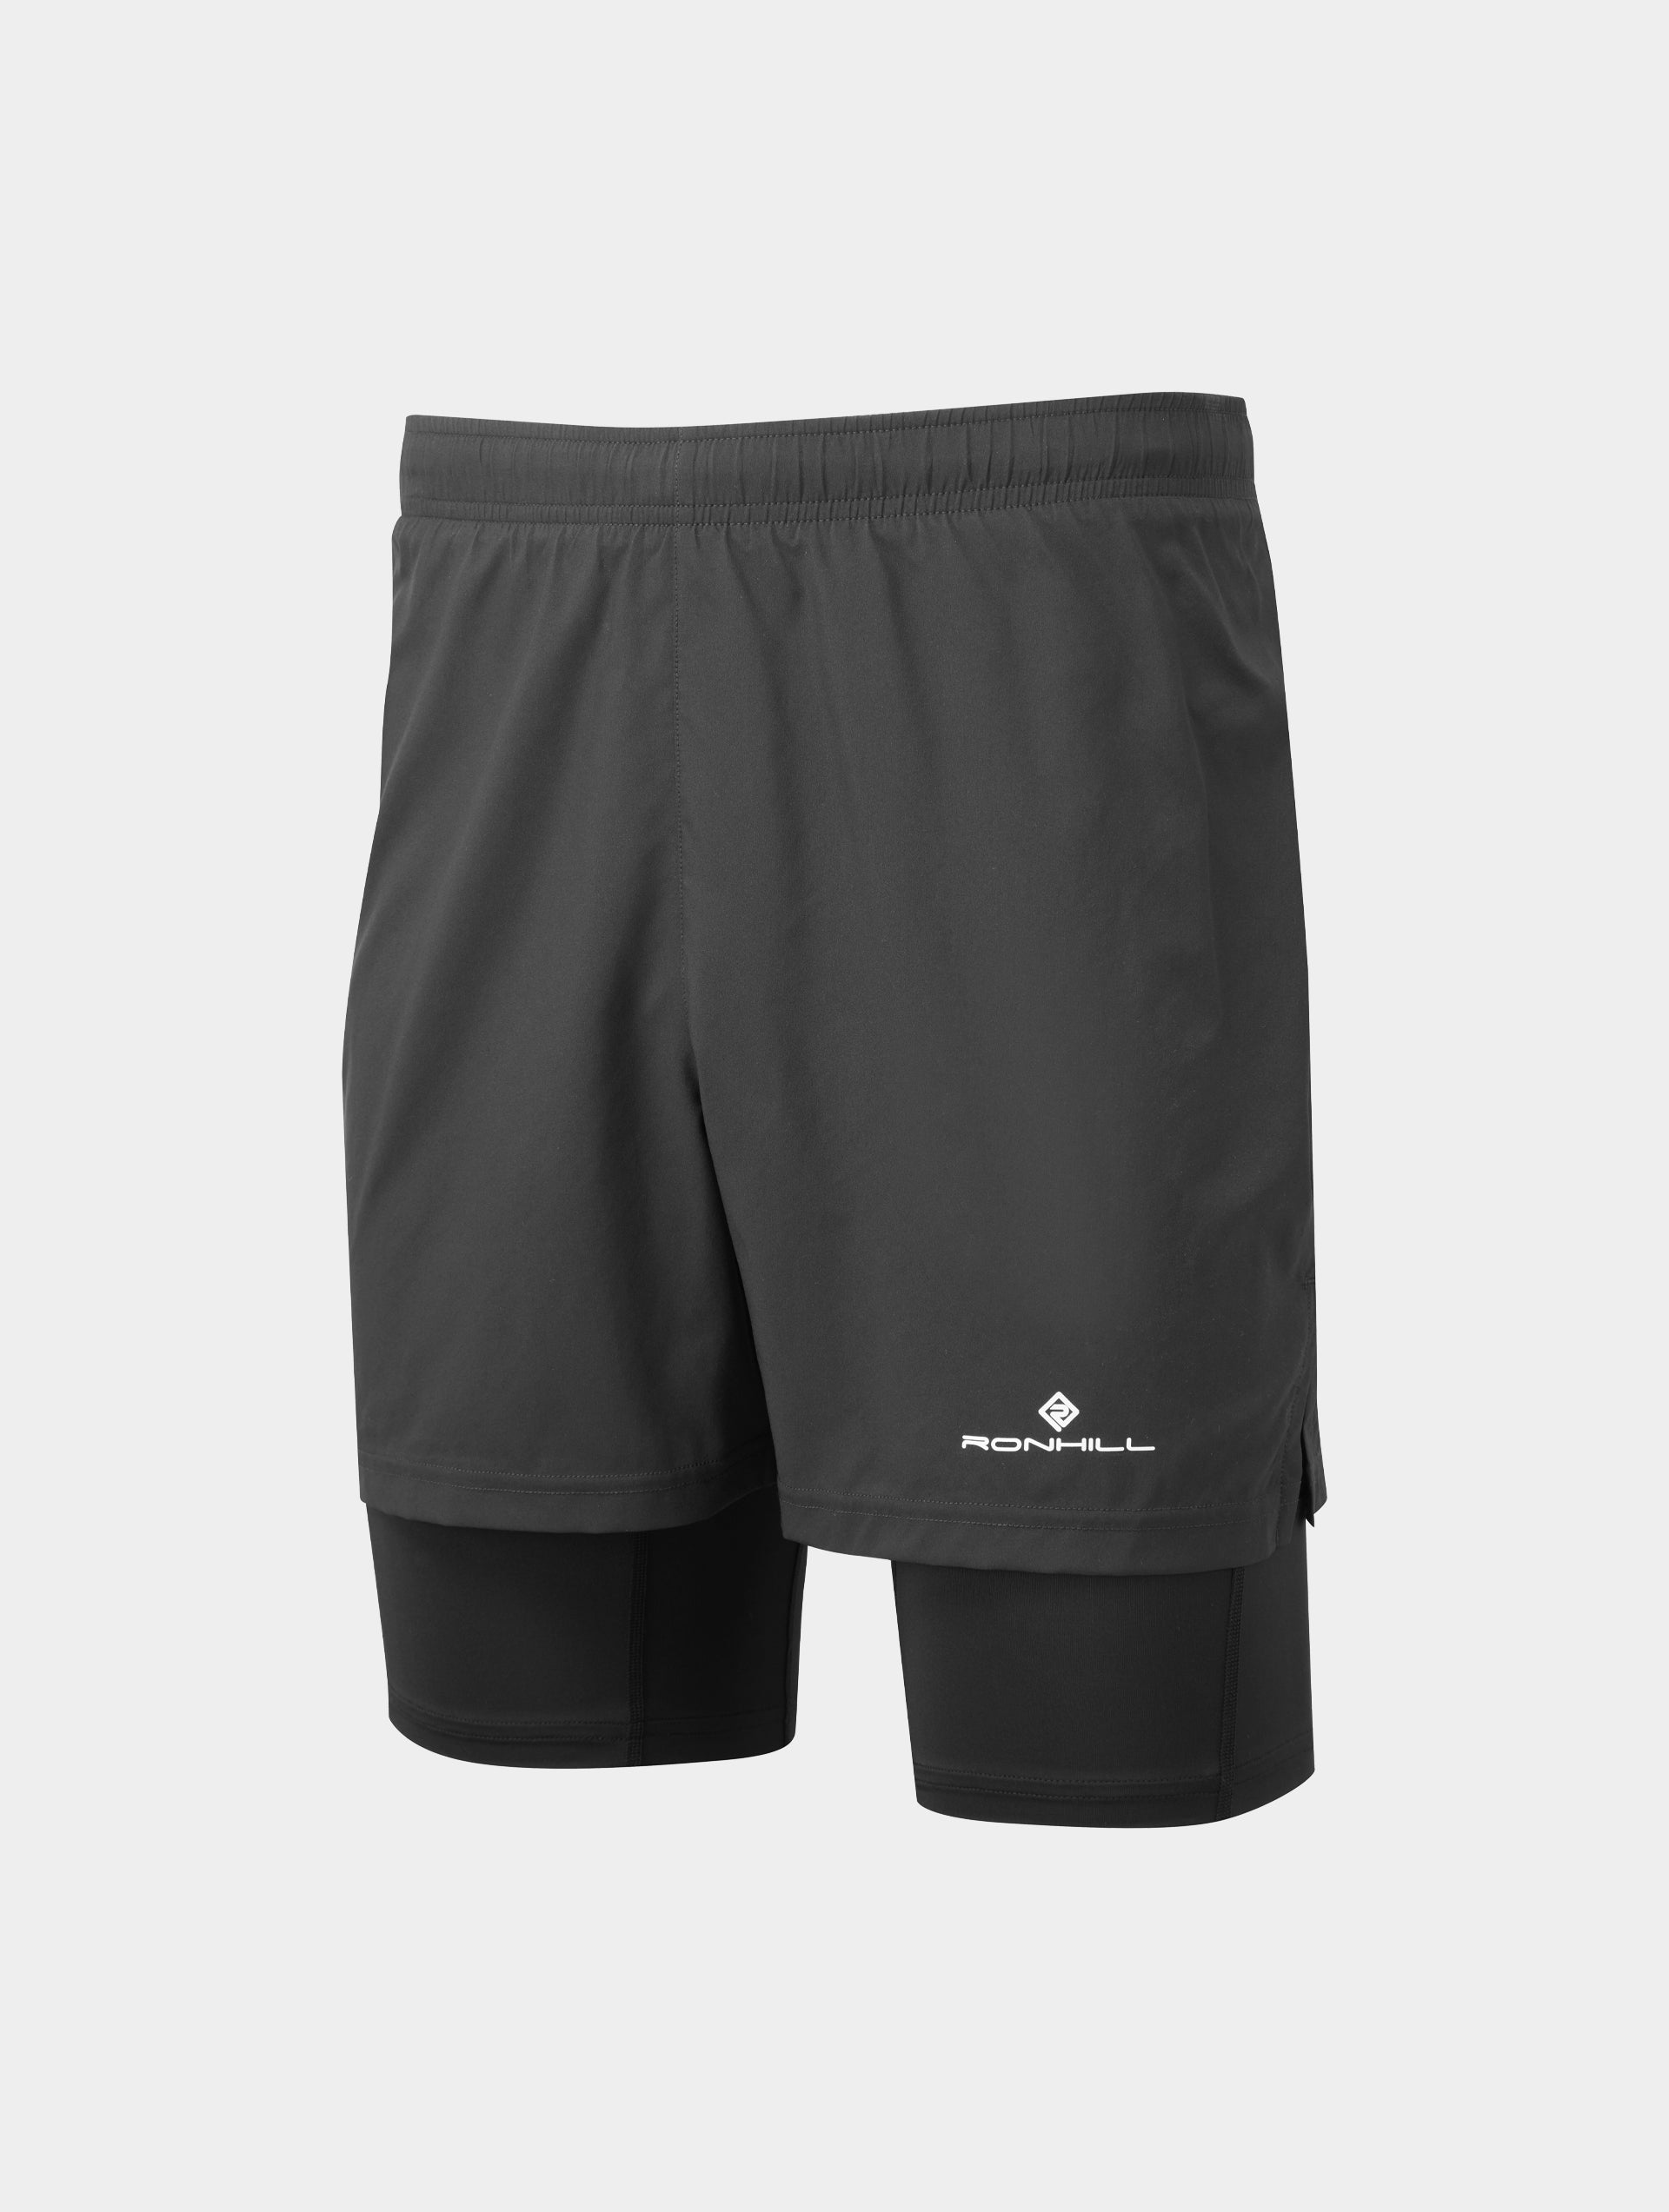 New Balance Men's Athletic Moisture Wicking Built-in Briefs Active 7 Core  Run Shorts